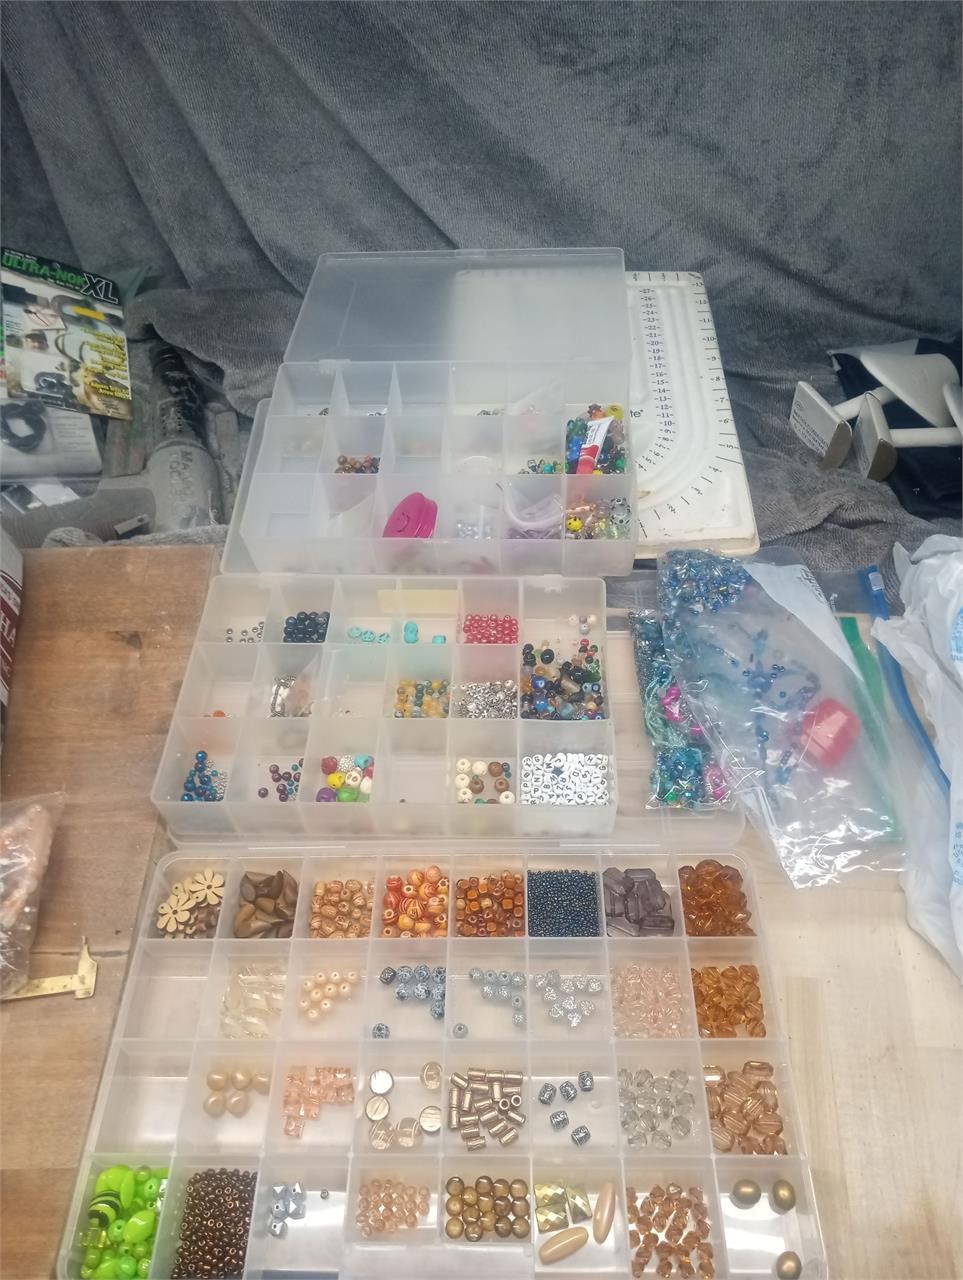 Beads and jewelry making supplies